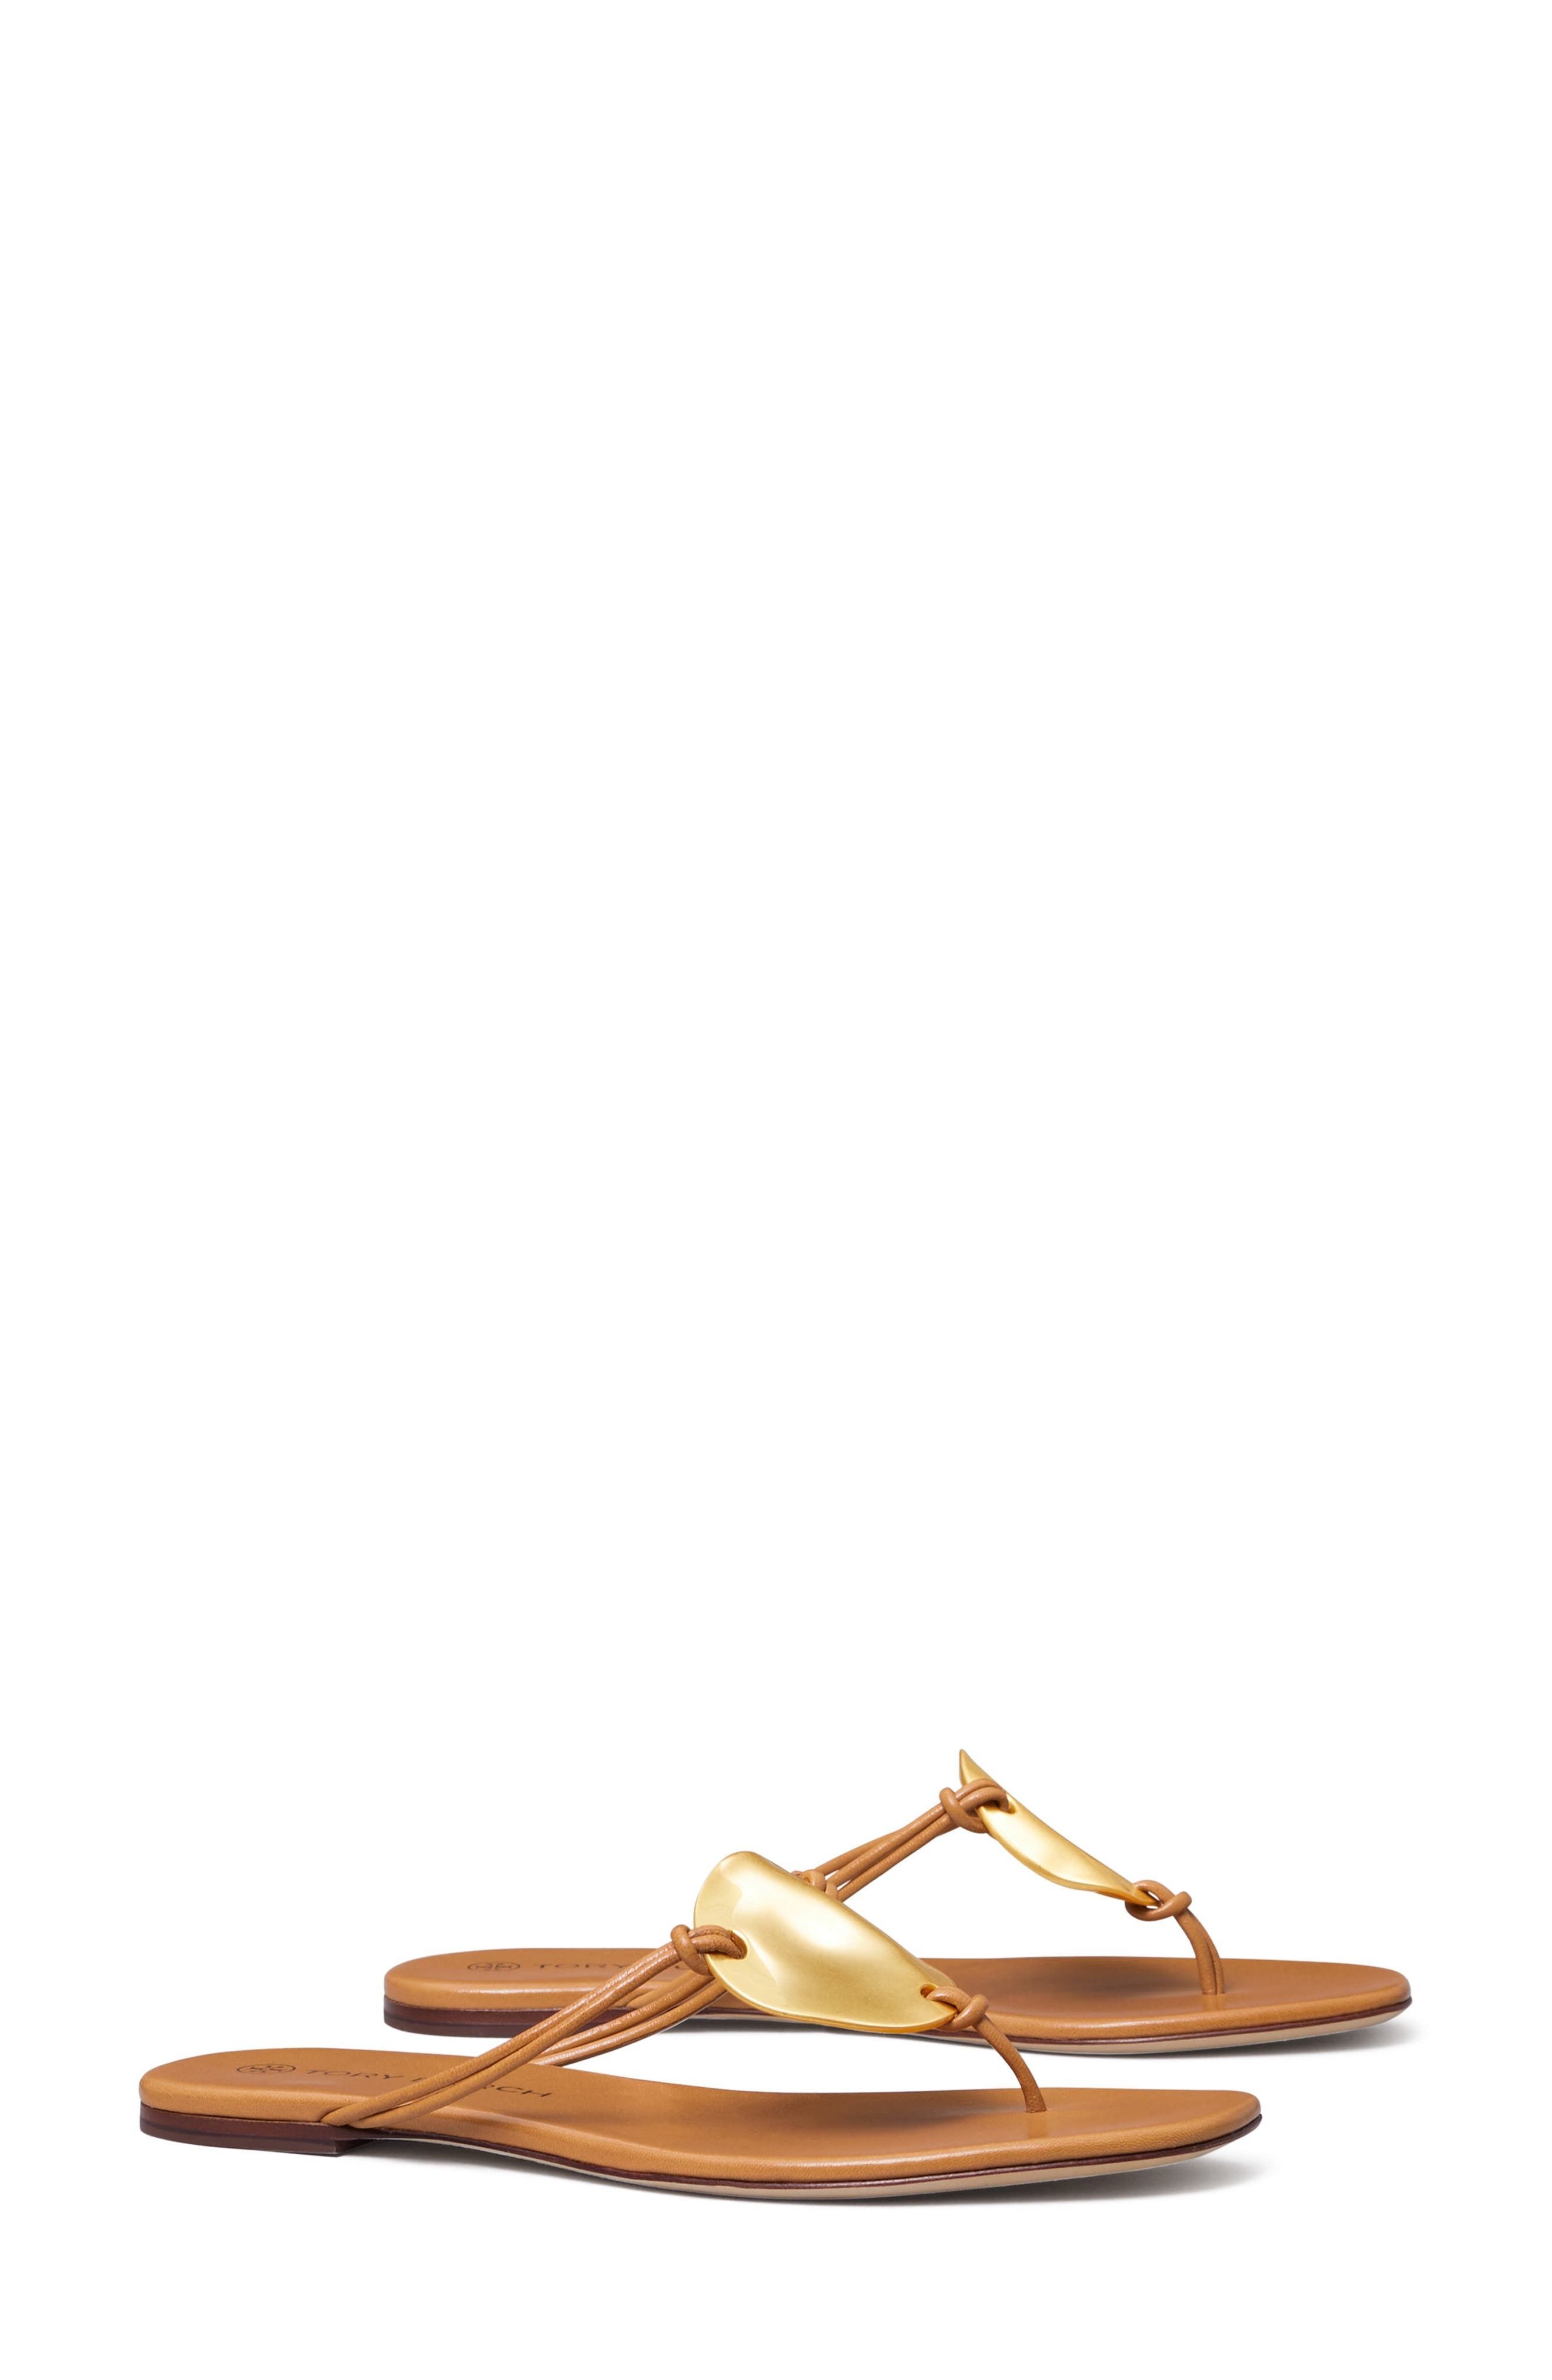 Tory Burch Patos Leather Sandal in Caramel Corn at Nordstrom, Size 8.5 | Nordstrom